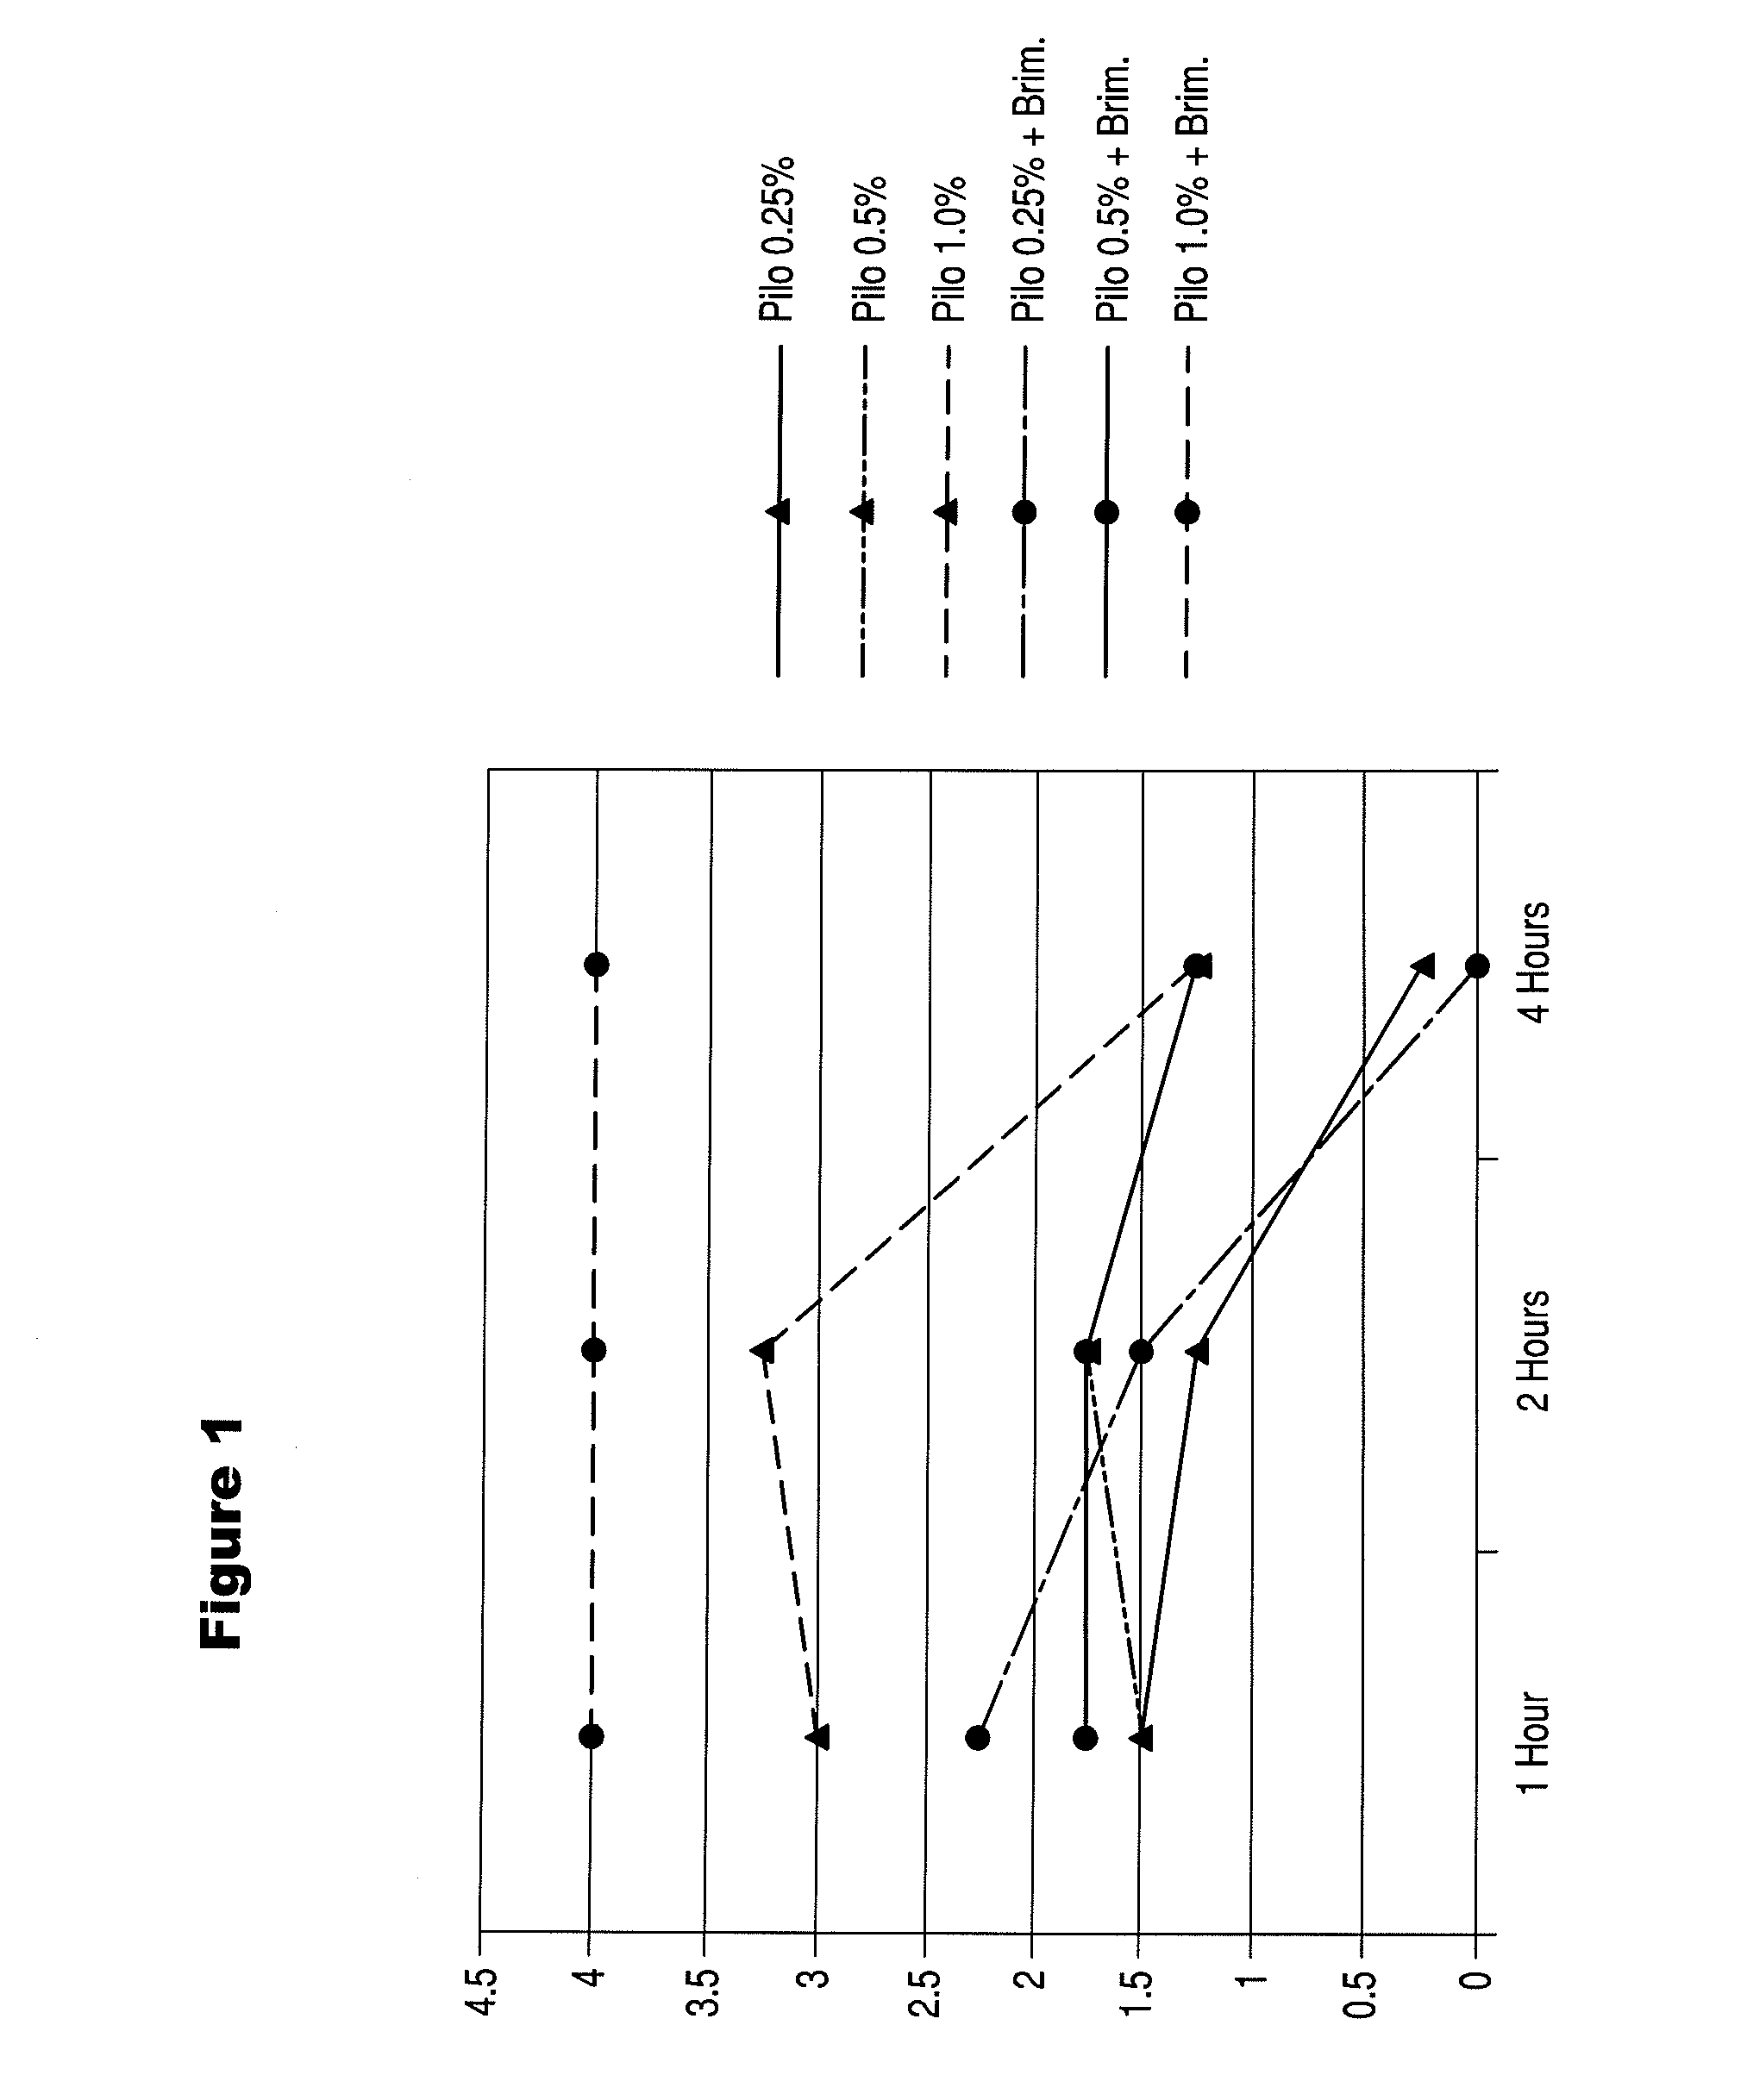 Preparations and Methods for Ameliorating or Reducing Presbyopia